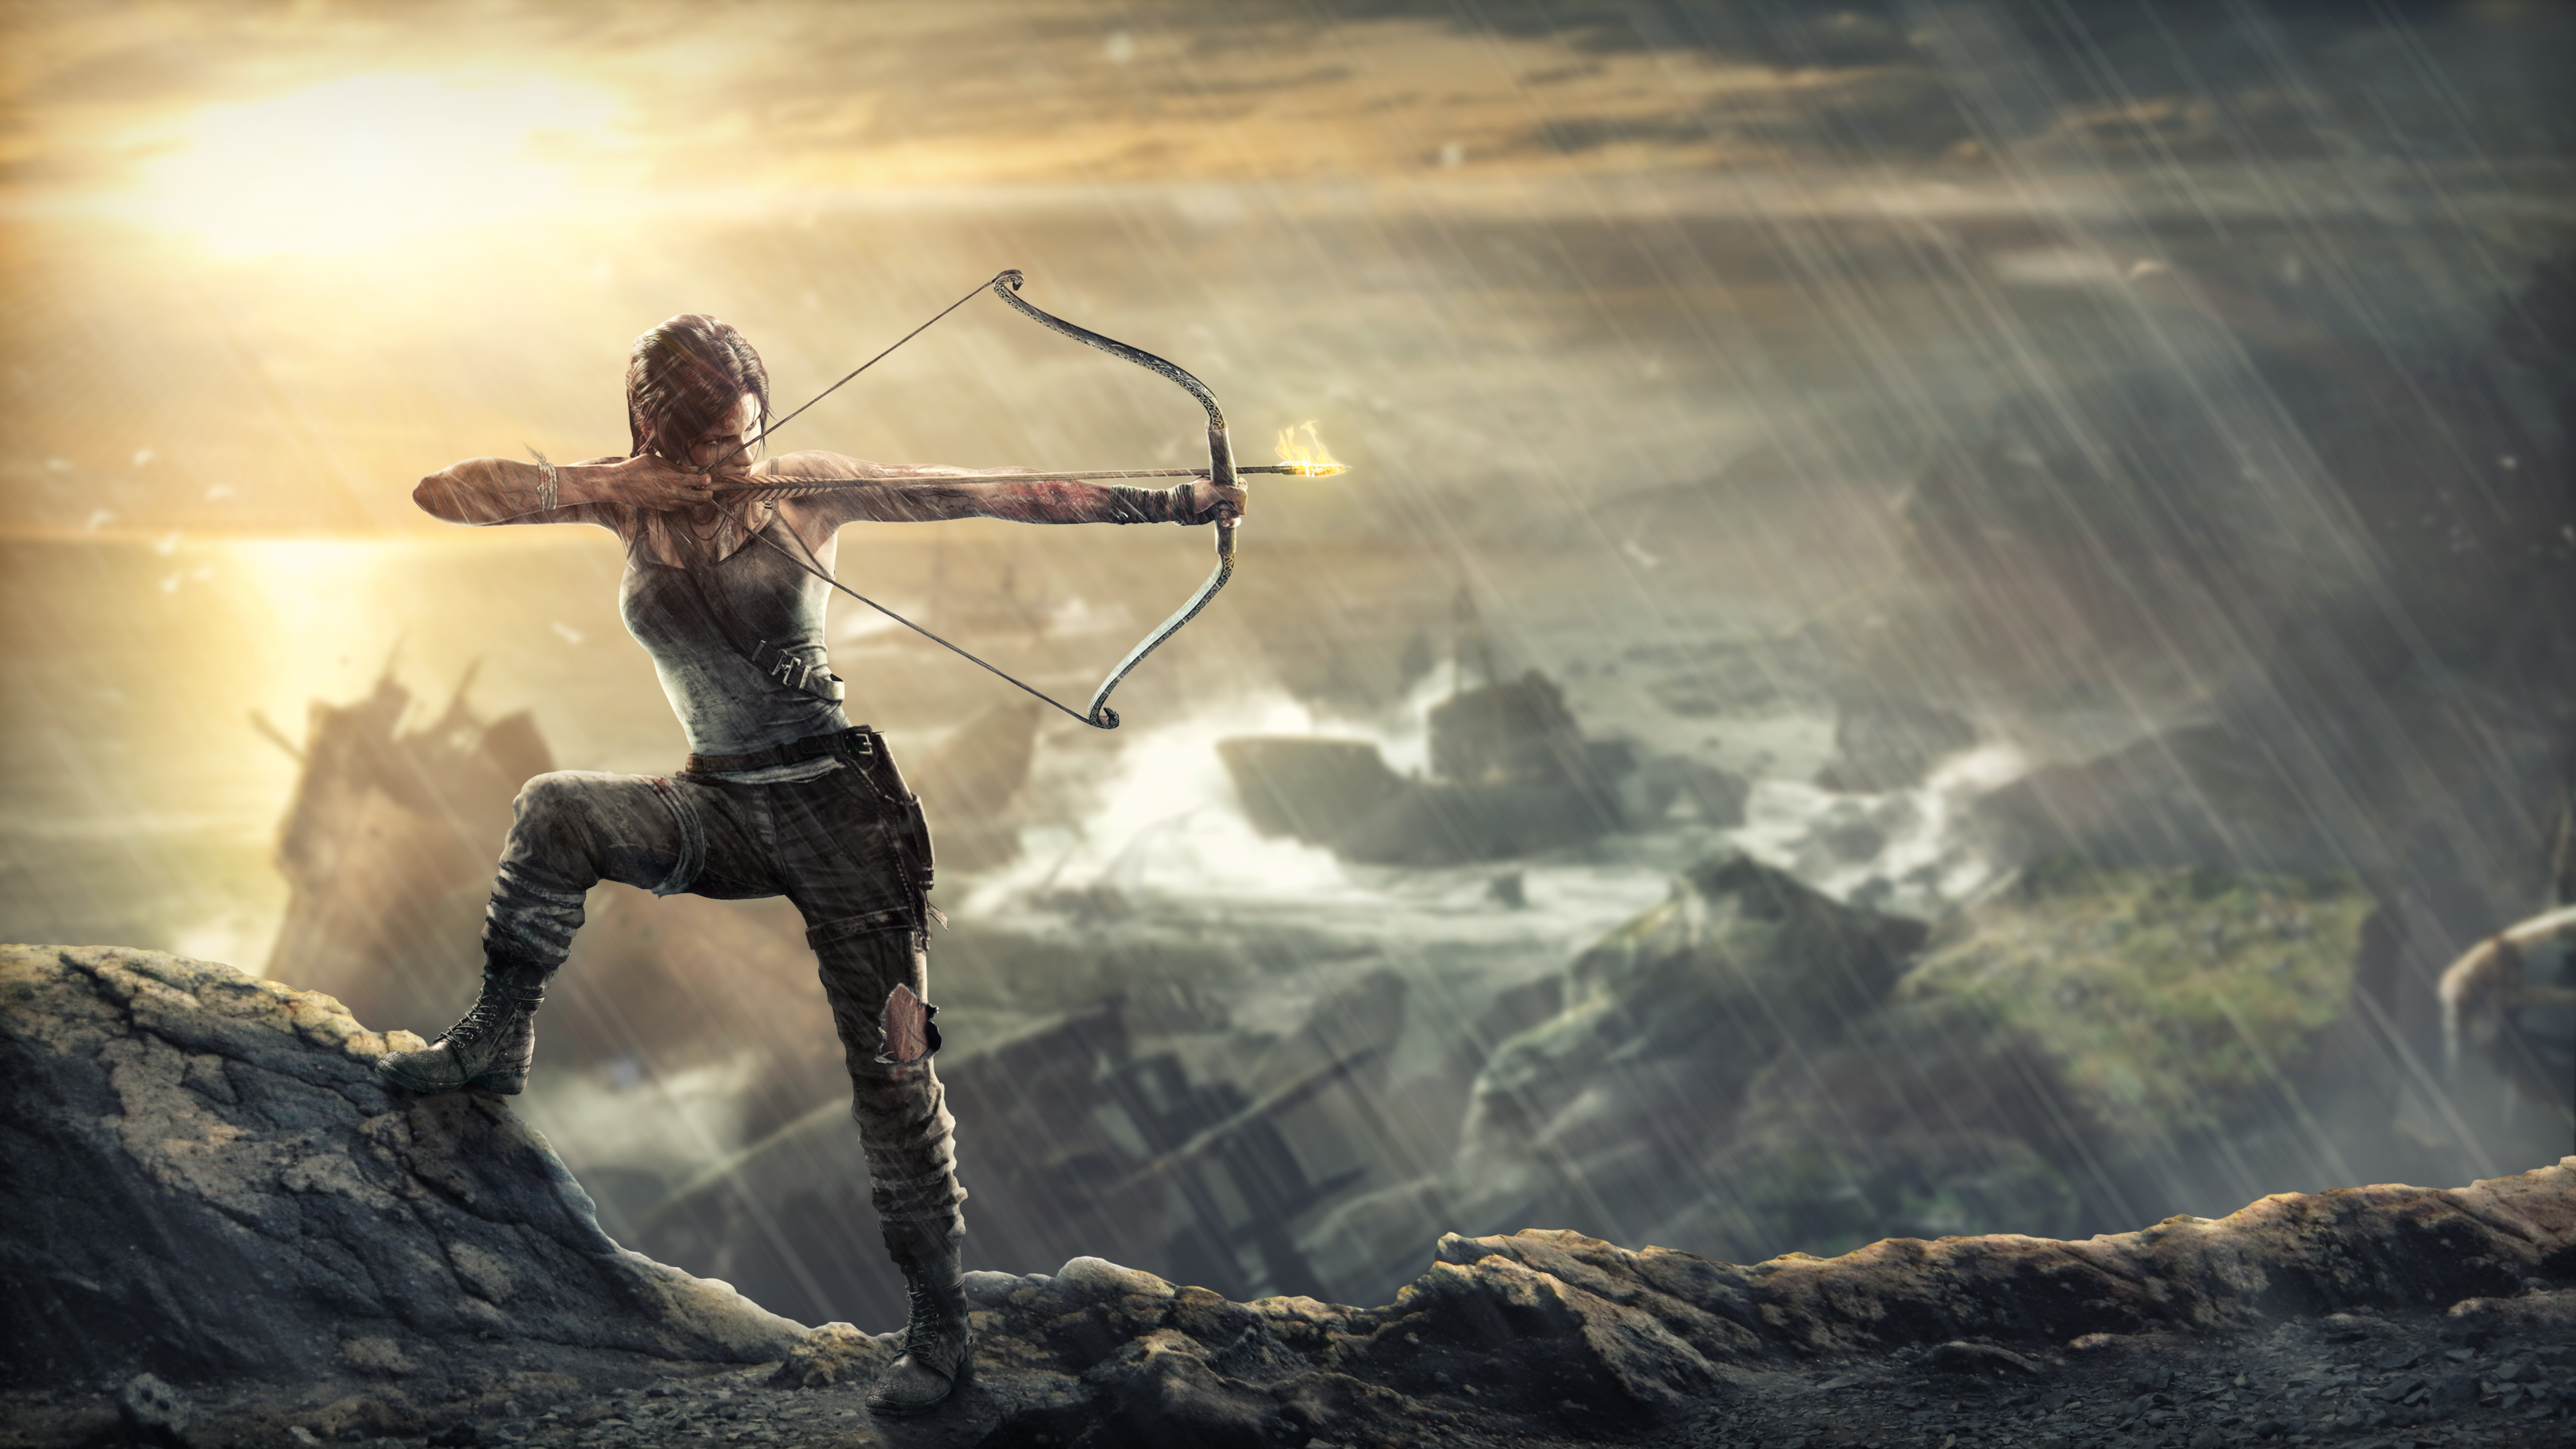 Tomb Raider 2013, Action-packed gameplay, Iconic game moments, Lara Croft's journey, 3840x2160 4K Desktop